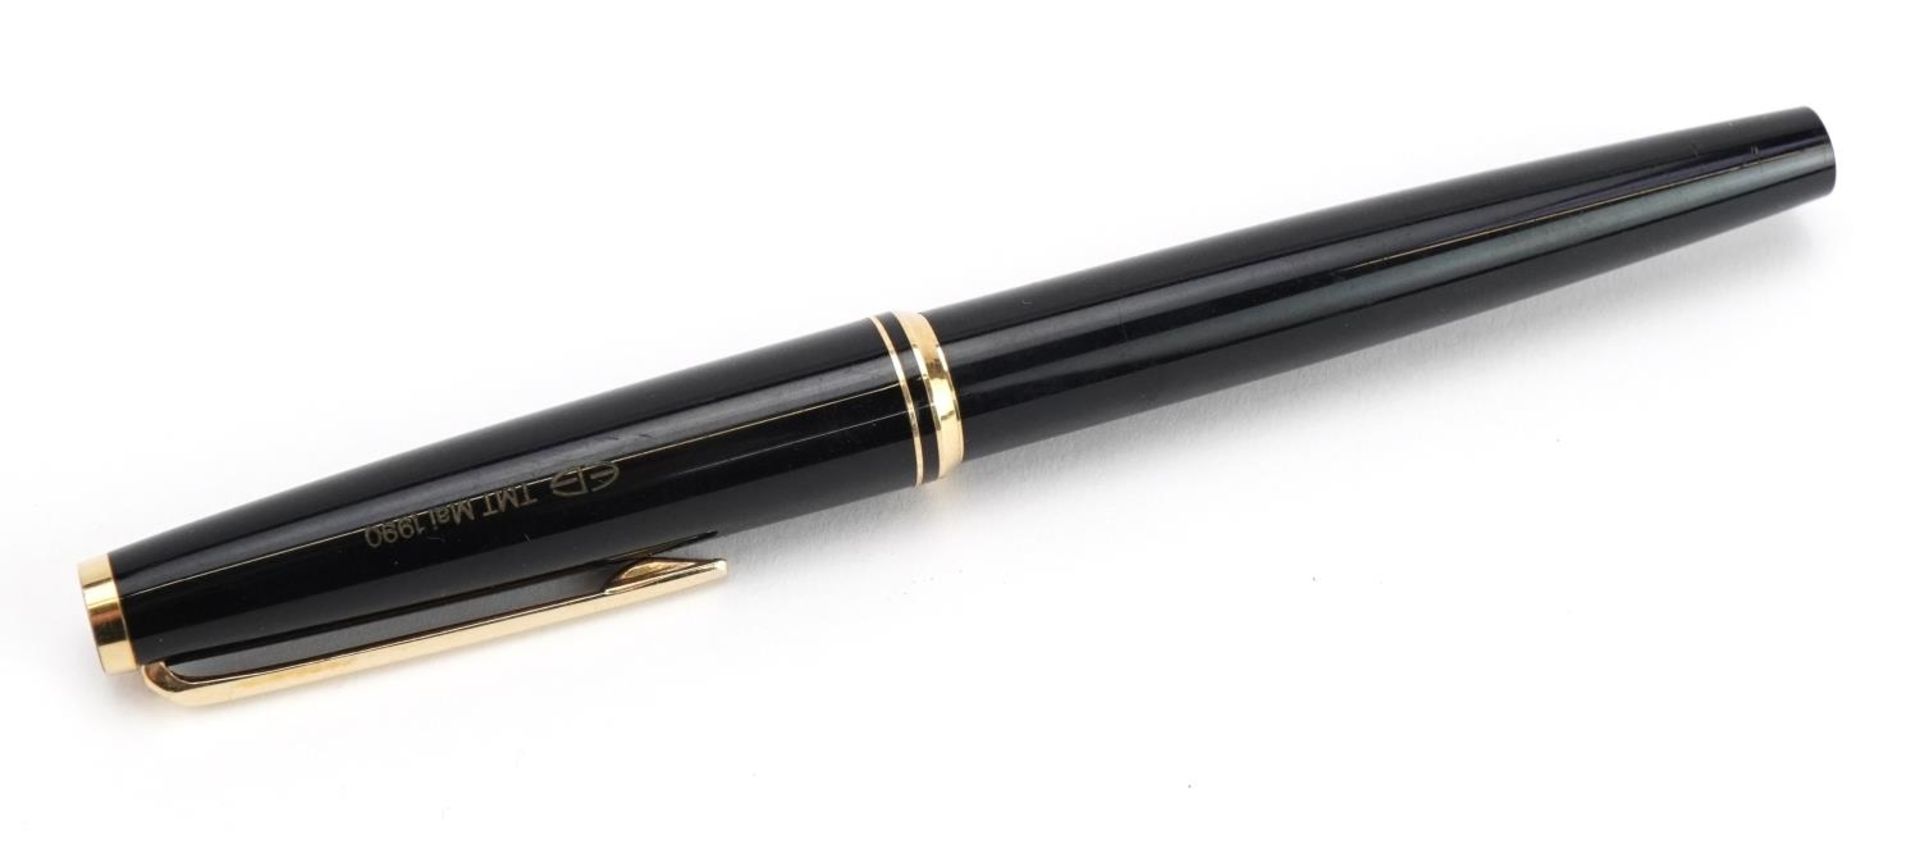 Vintage Mont Blanc fountain pen, Made in Germany - Image 3 of 4